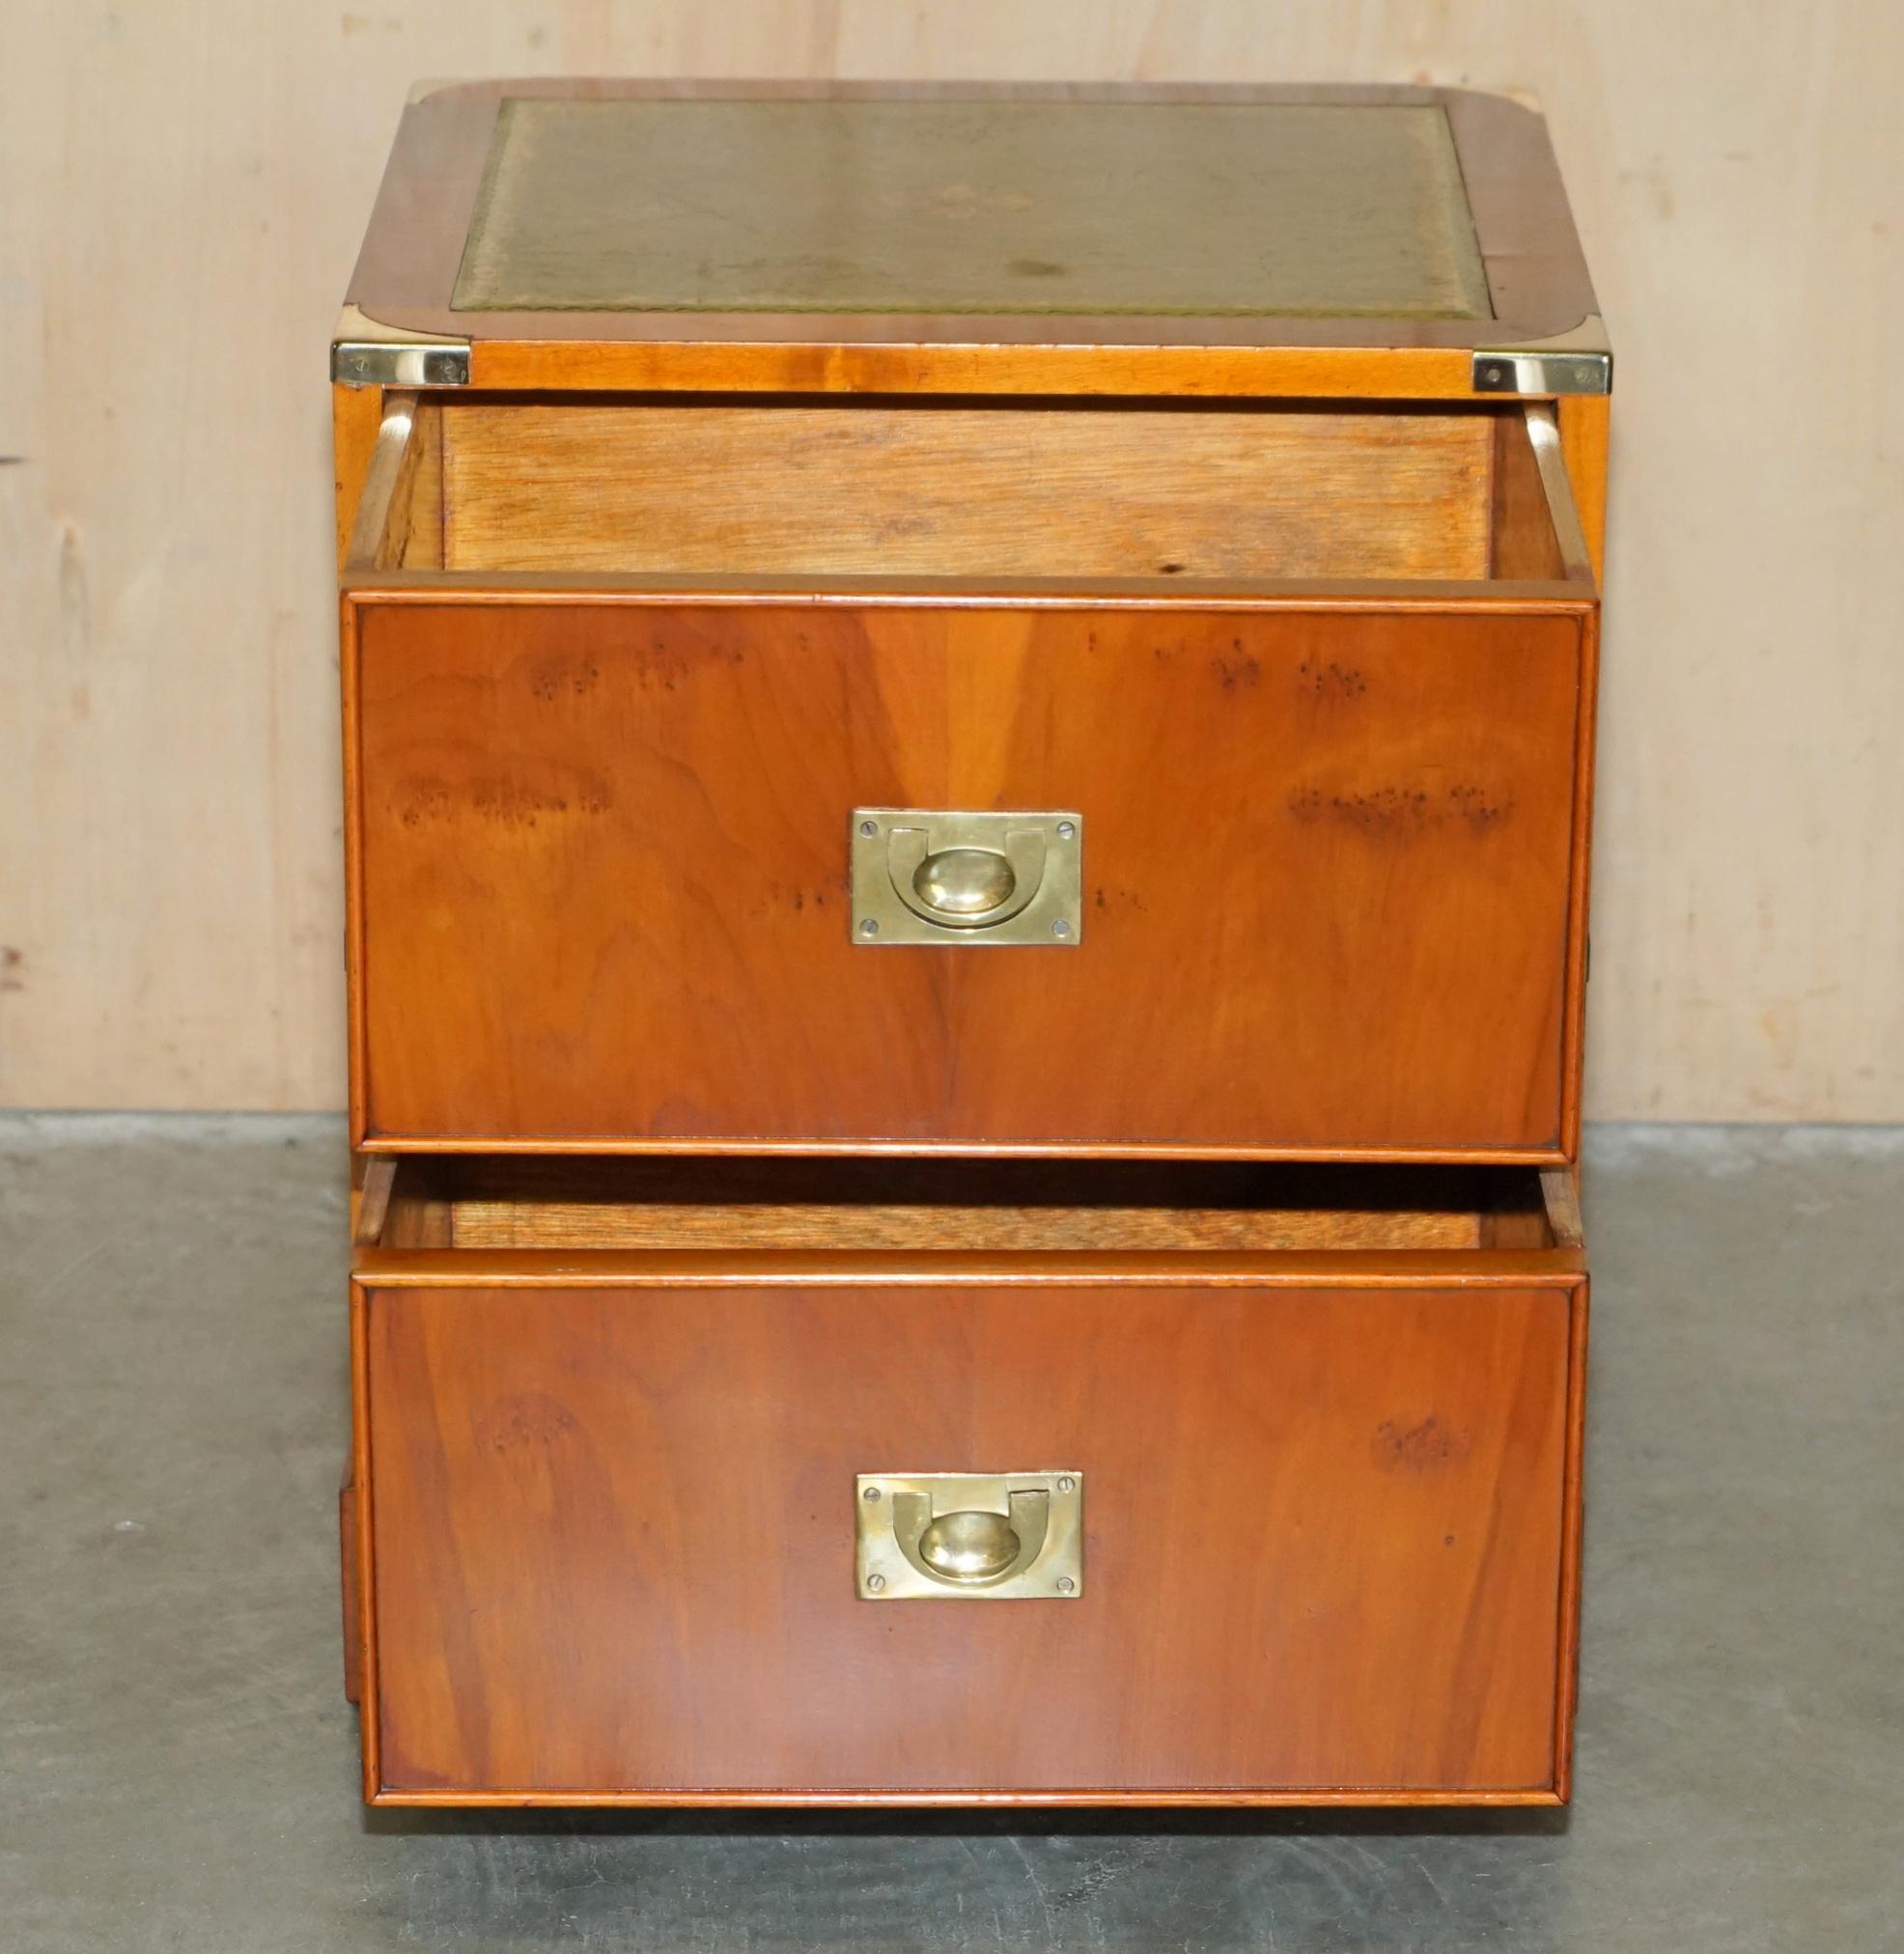 LOVELY PAiR OF BURR YEW WOOD GREEN LEATHER MILITARY CAMPAIGN NIGHTSTAND DRAWERS im Angebot 10